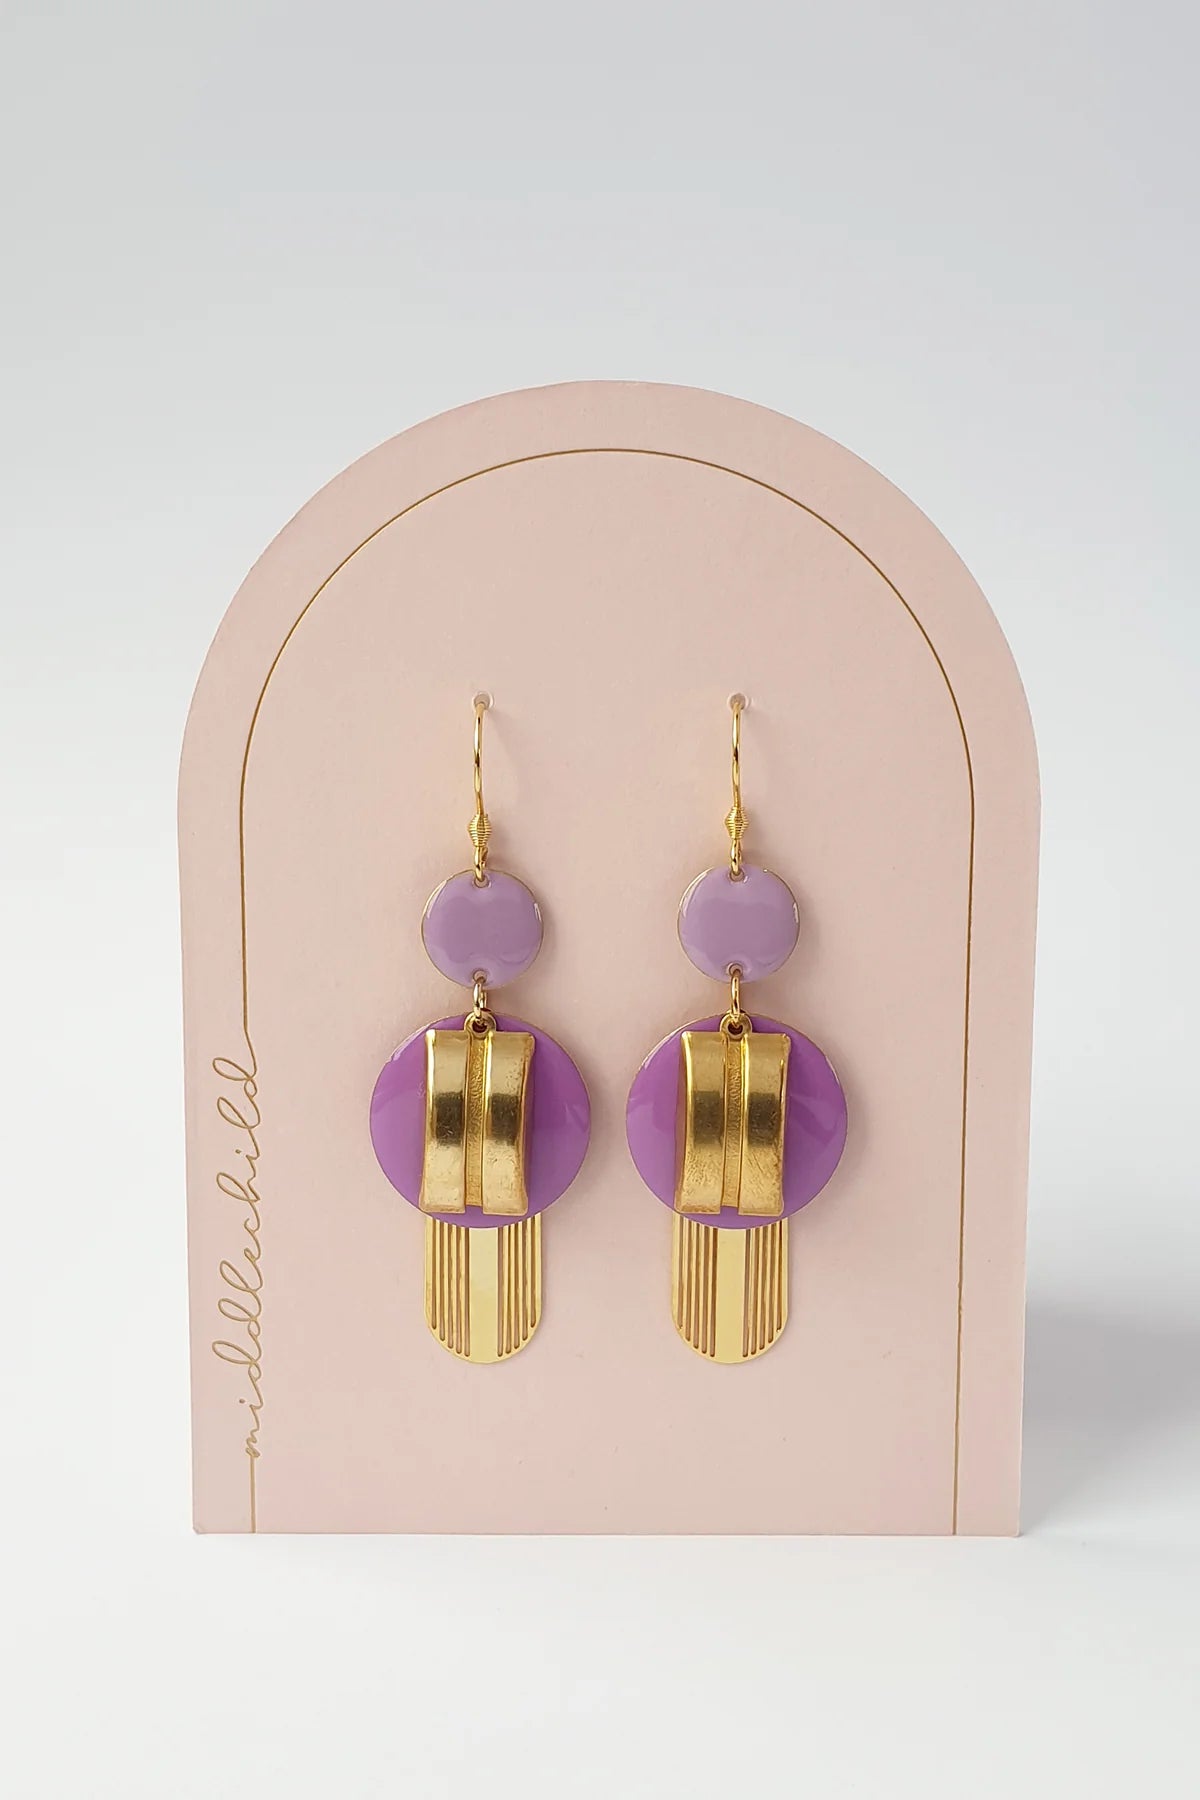 Middle Child - Ditto Earrings